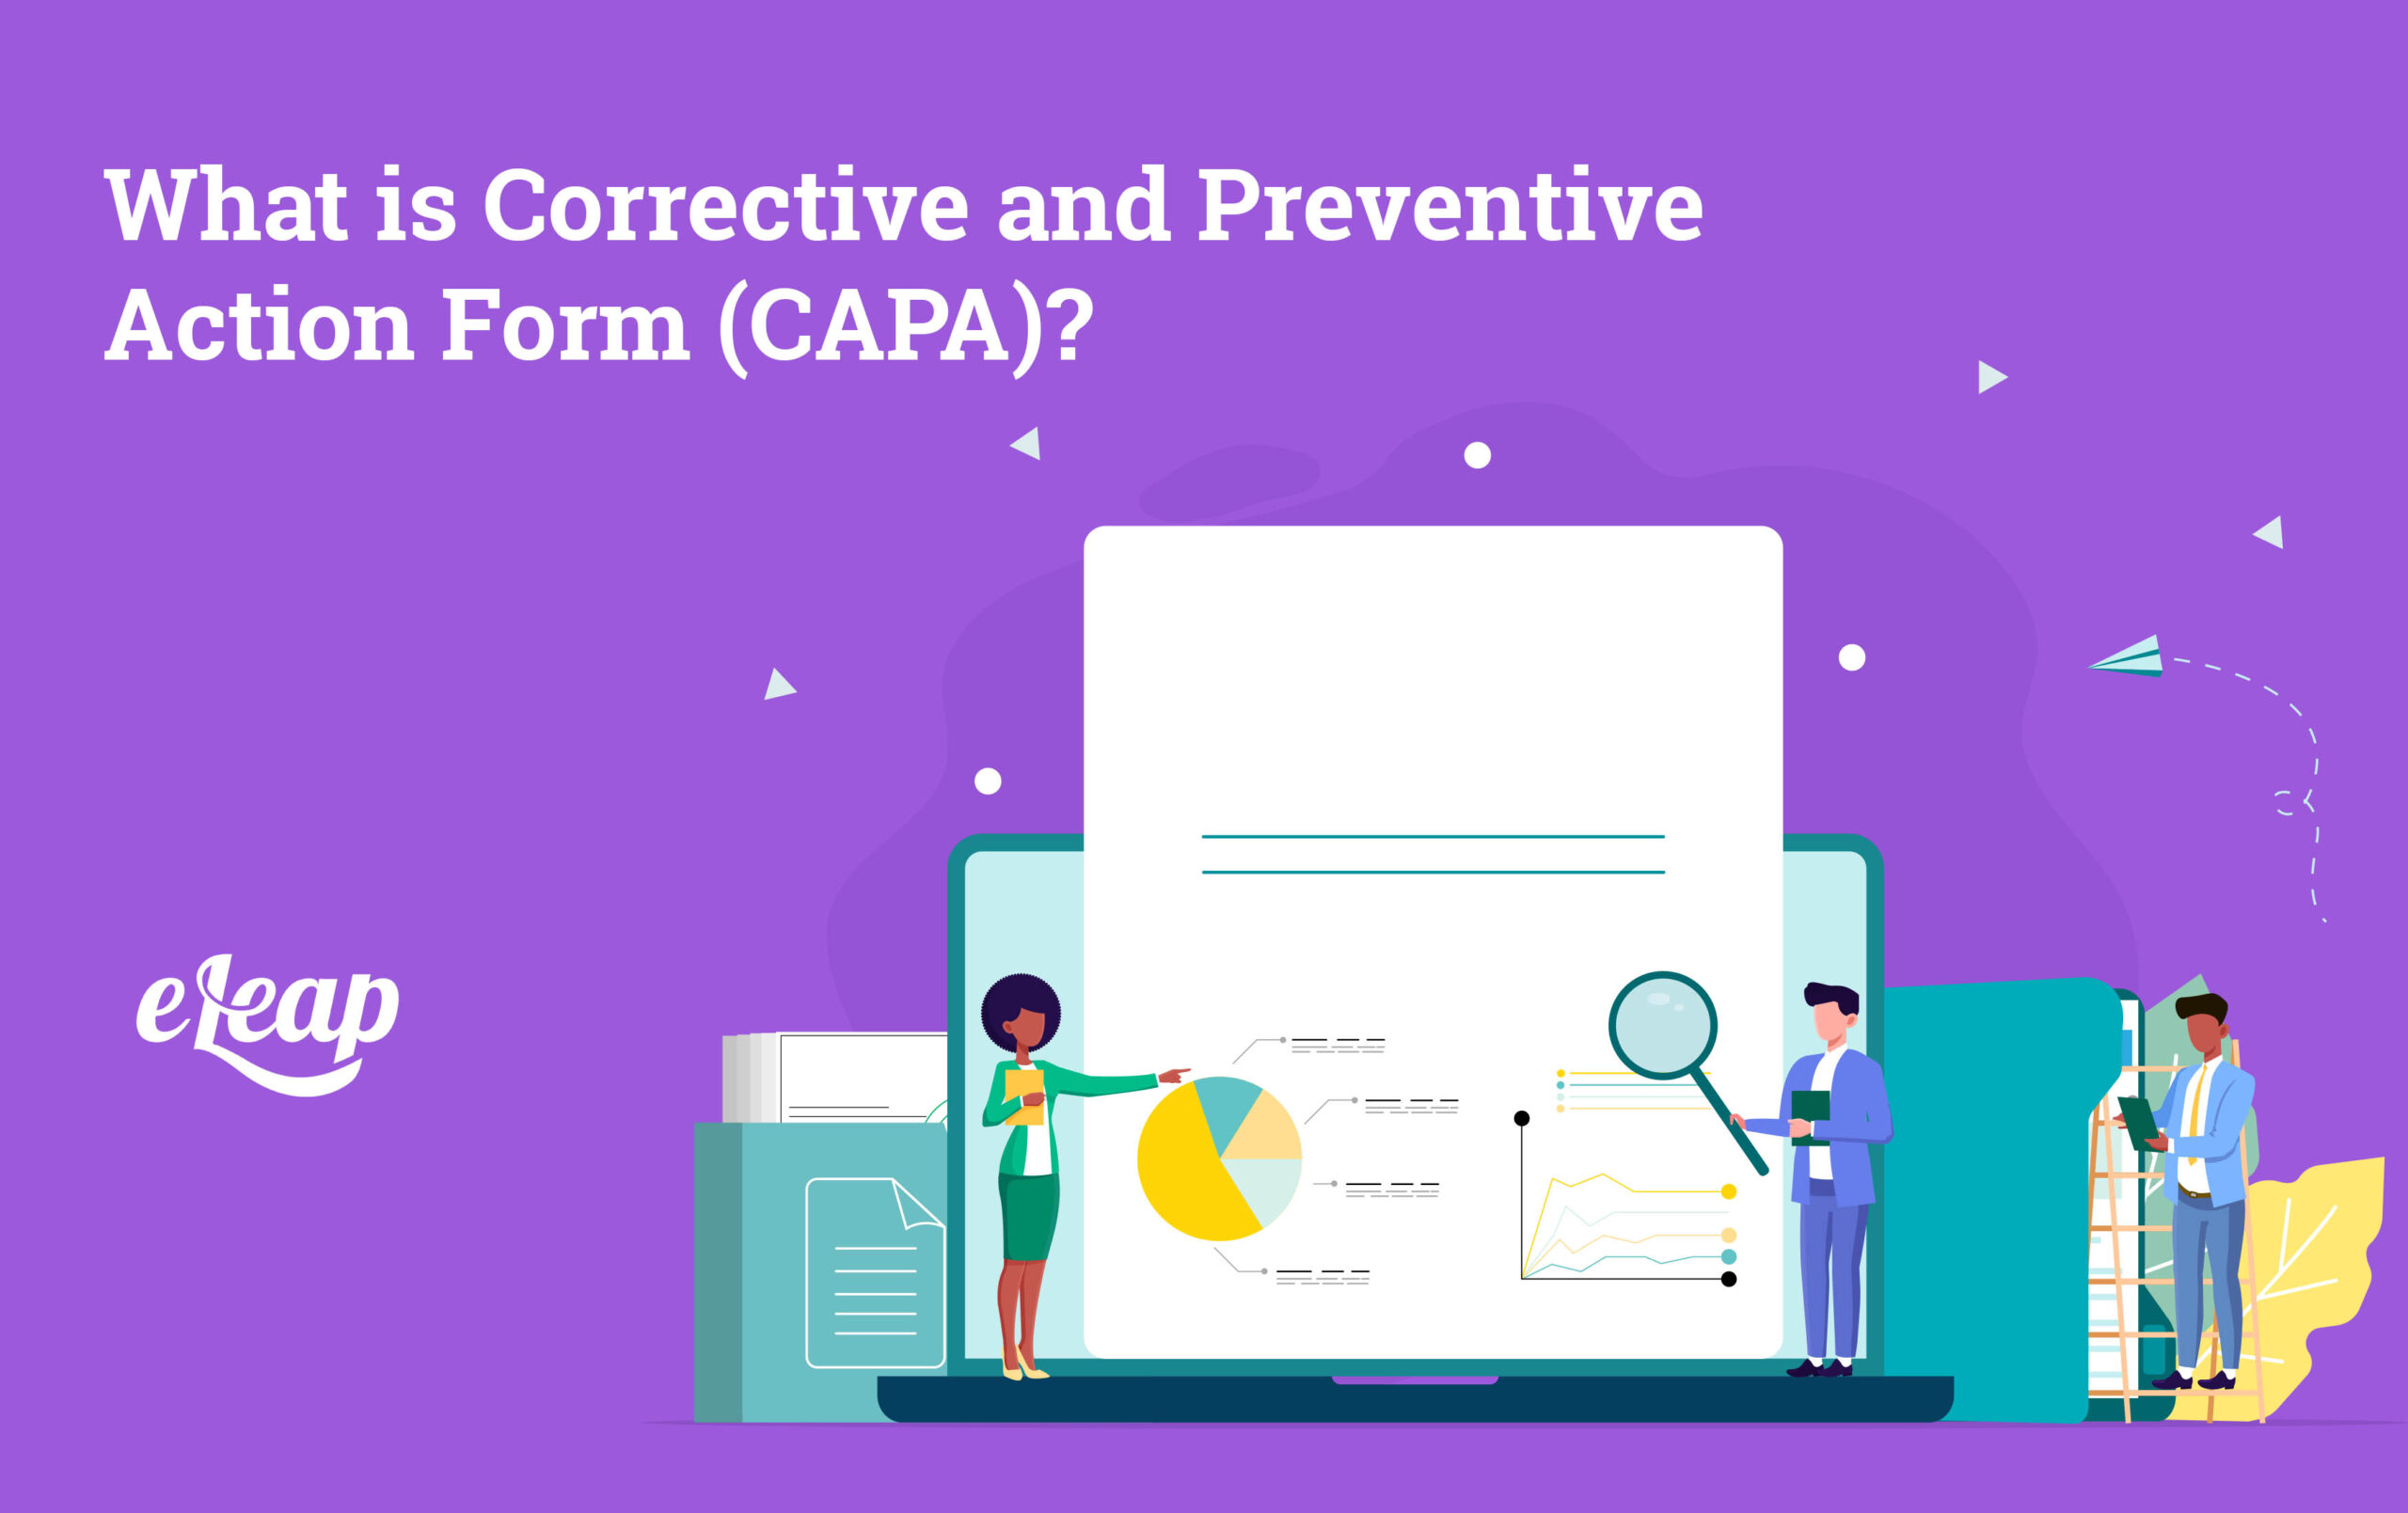 Corrective and Preventive Action Form